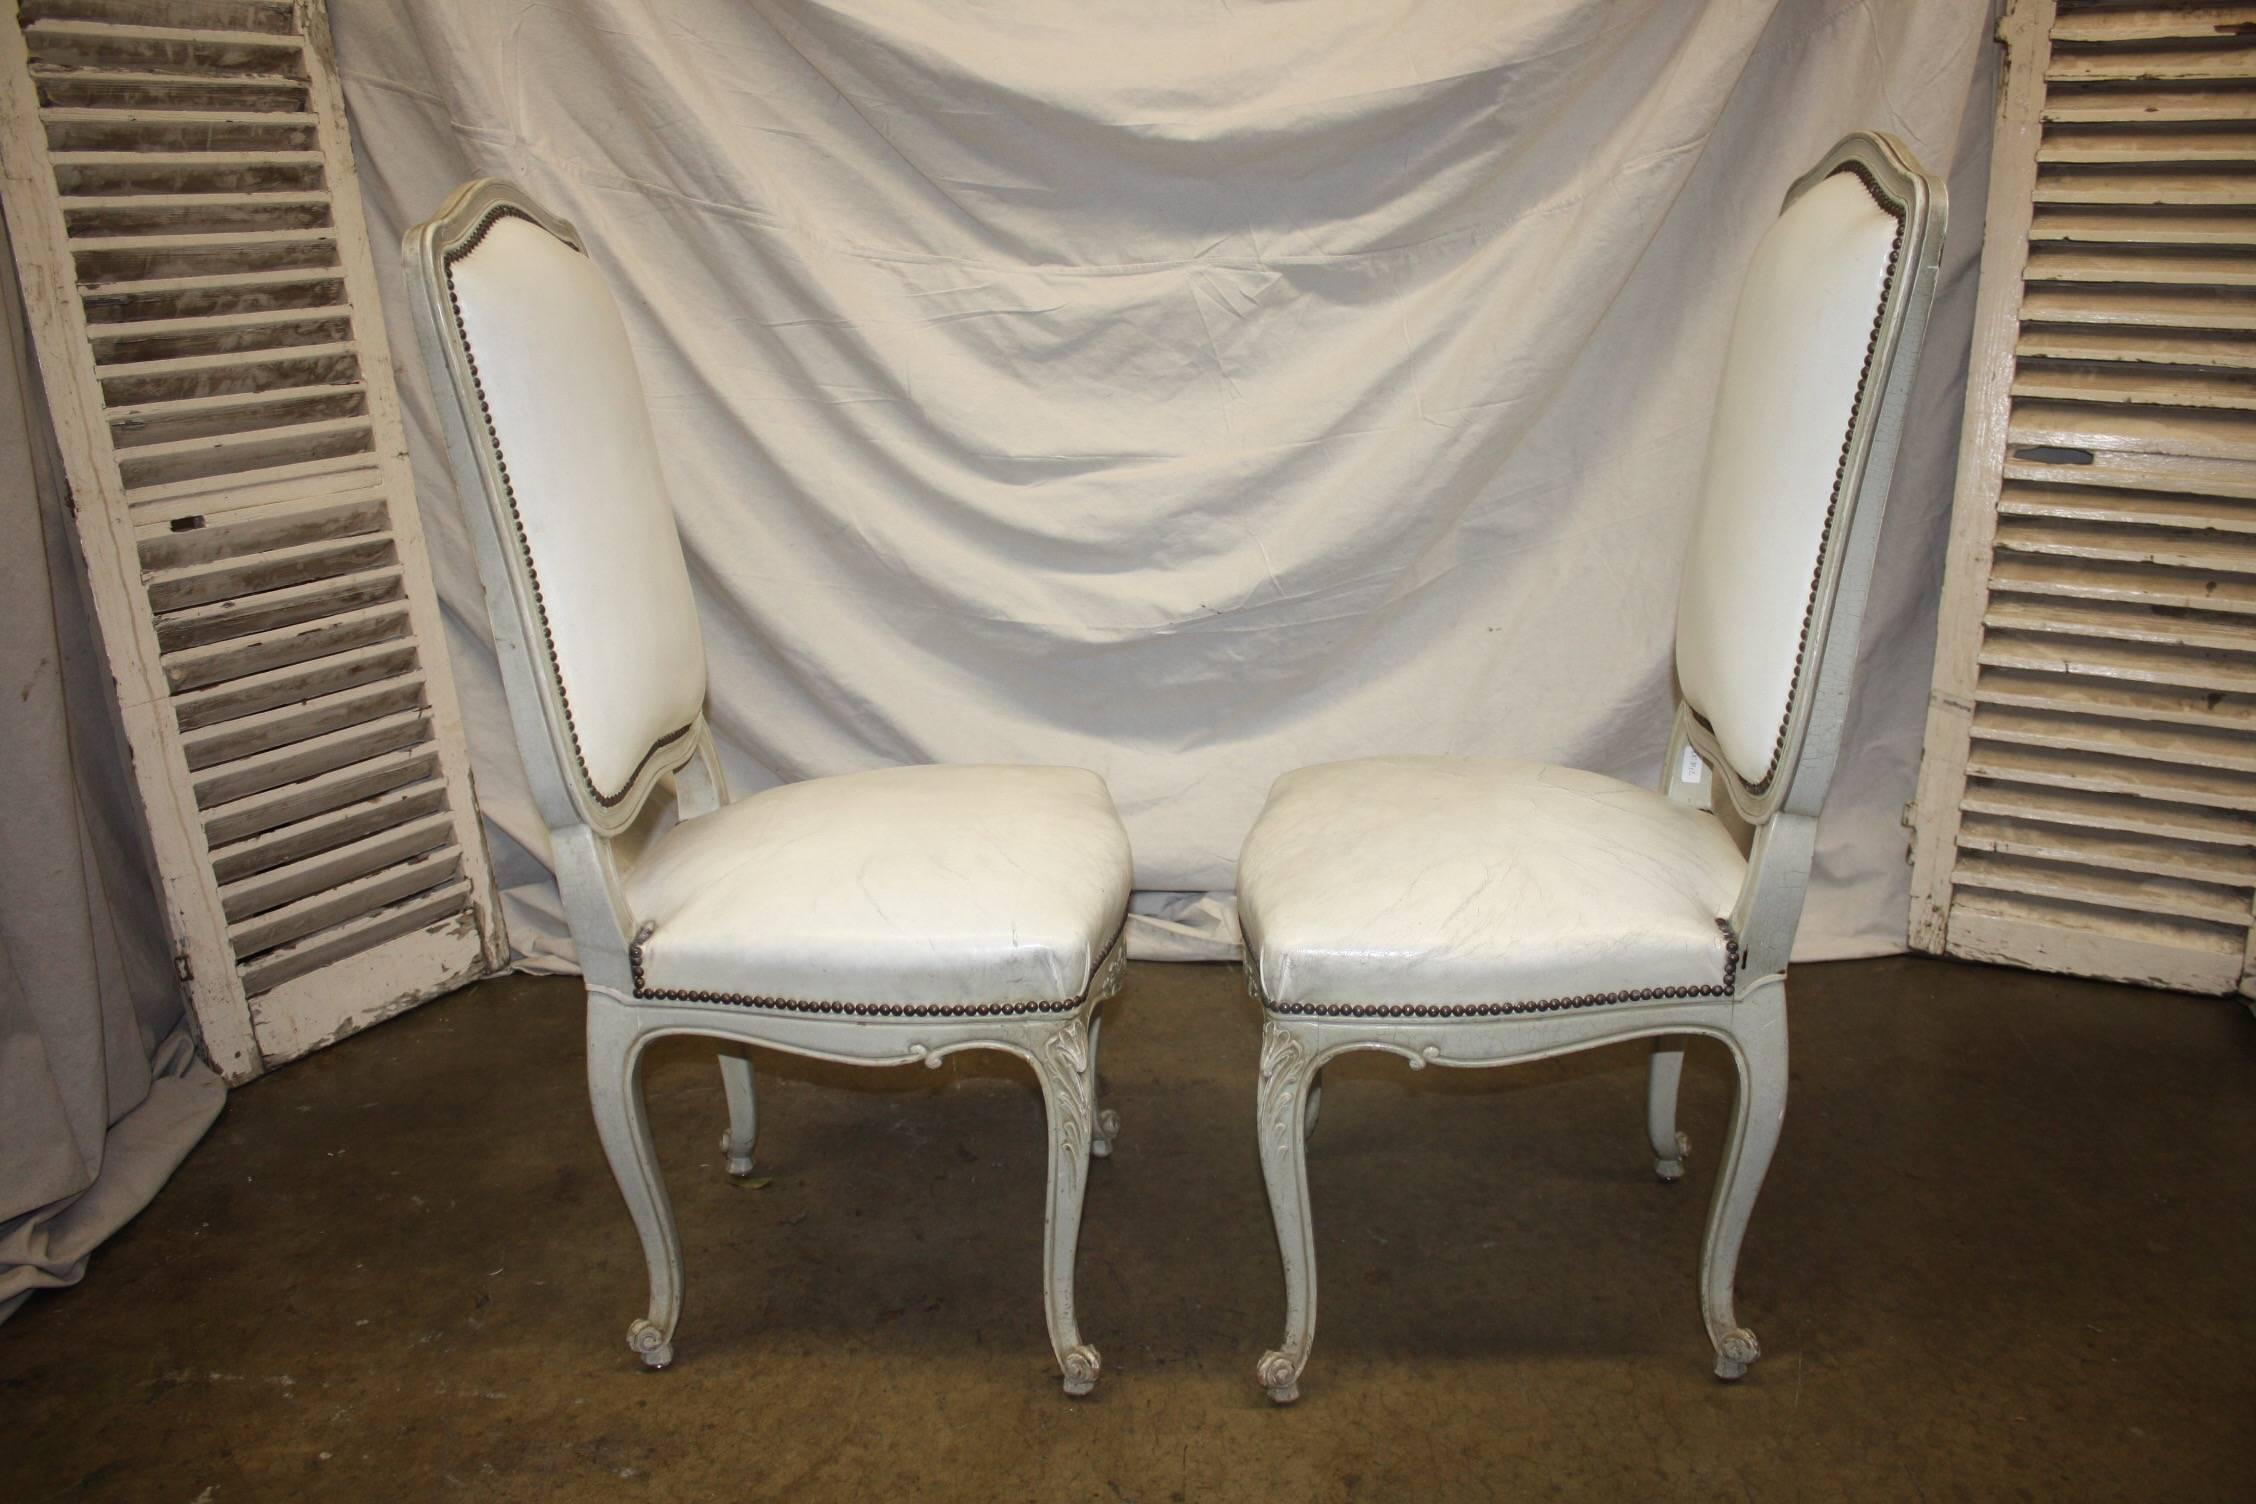 Exquisite 19th Century Italian Painted Chairs 1